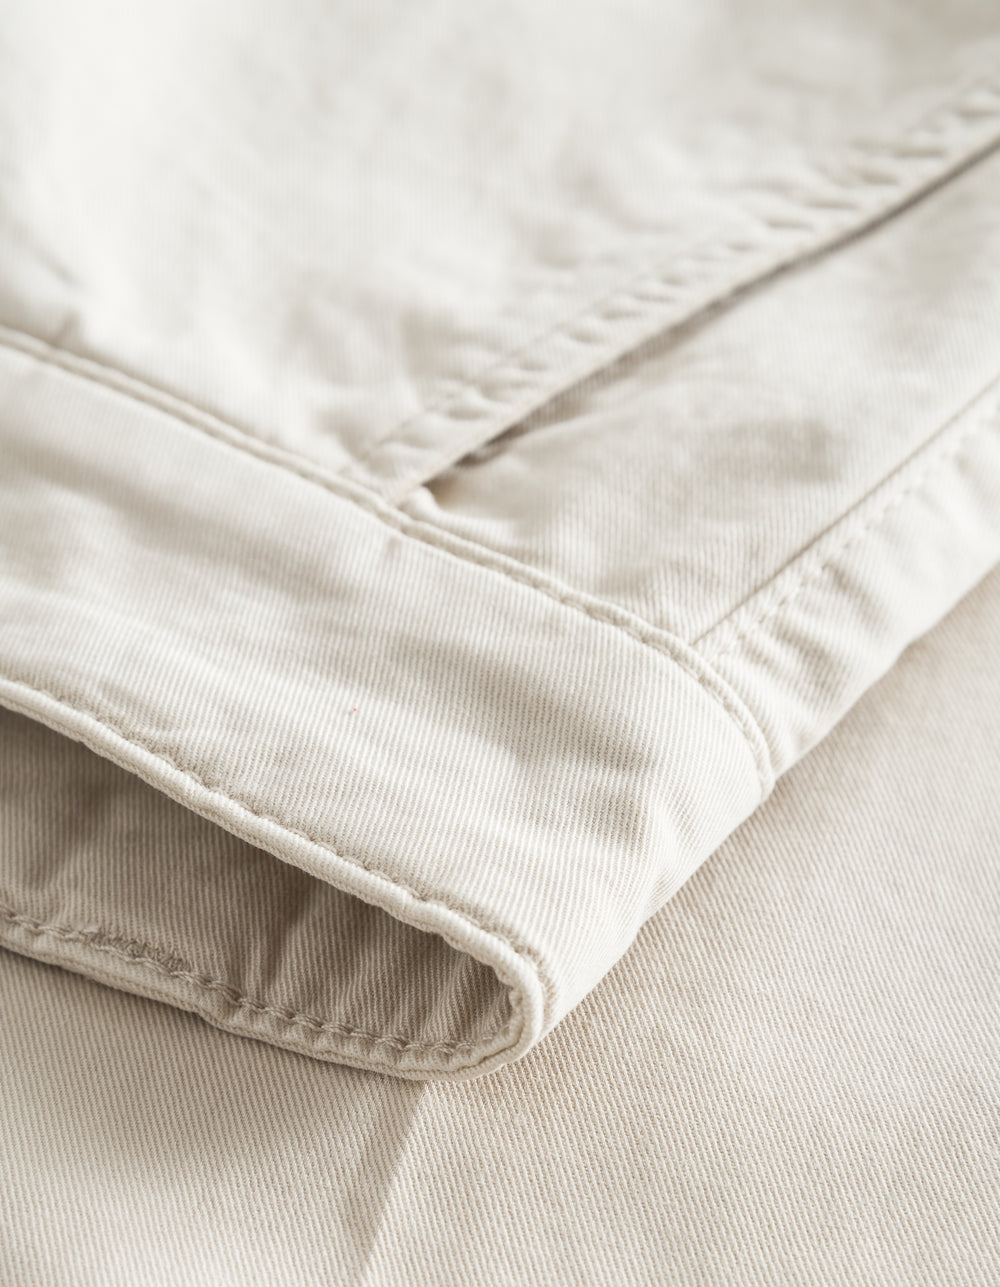 PAUL COTTON PANTS - OYSTER GRAY